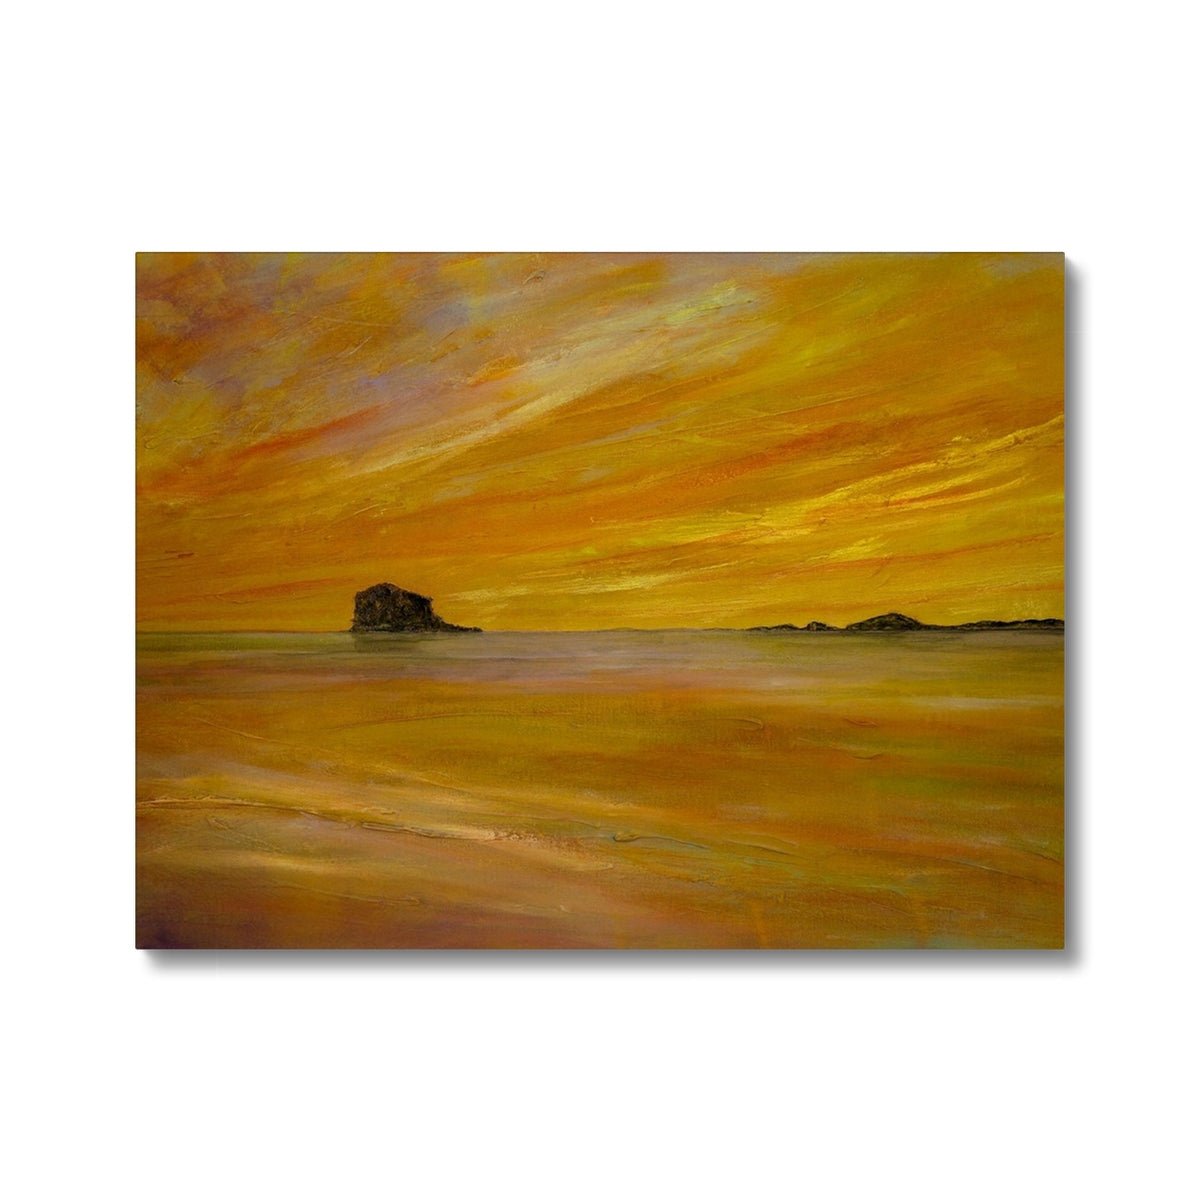 Bass Rock Dusk Painting | Canvas From Scotland-Contemporary Stretched Canvas Prints-Edinburgh & Glasgow Art Gallery-24"x18"-Paintings, Prints, Homeware, Art Gifts From Scotland By Scottish Artist Kevin Hunter